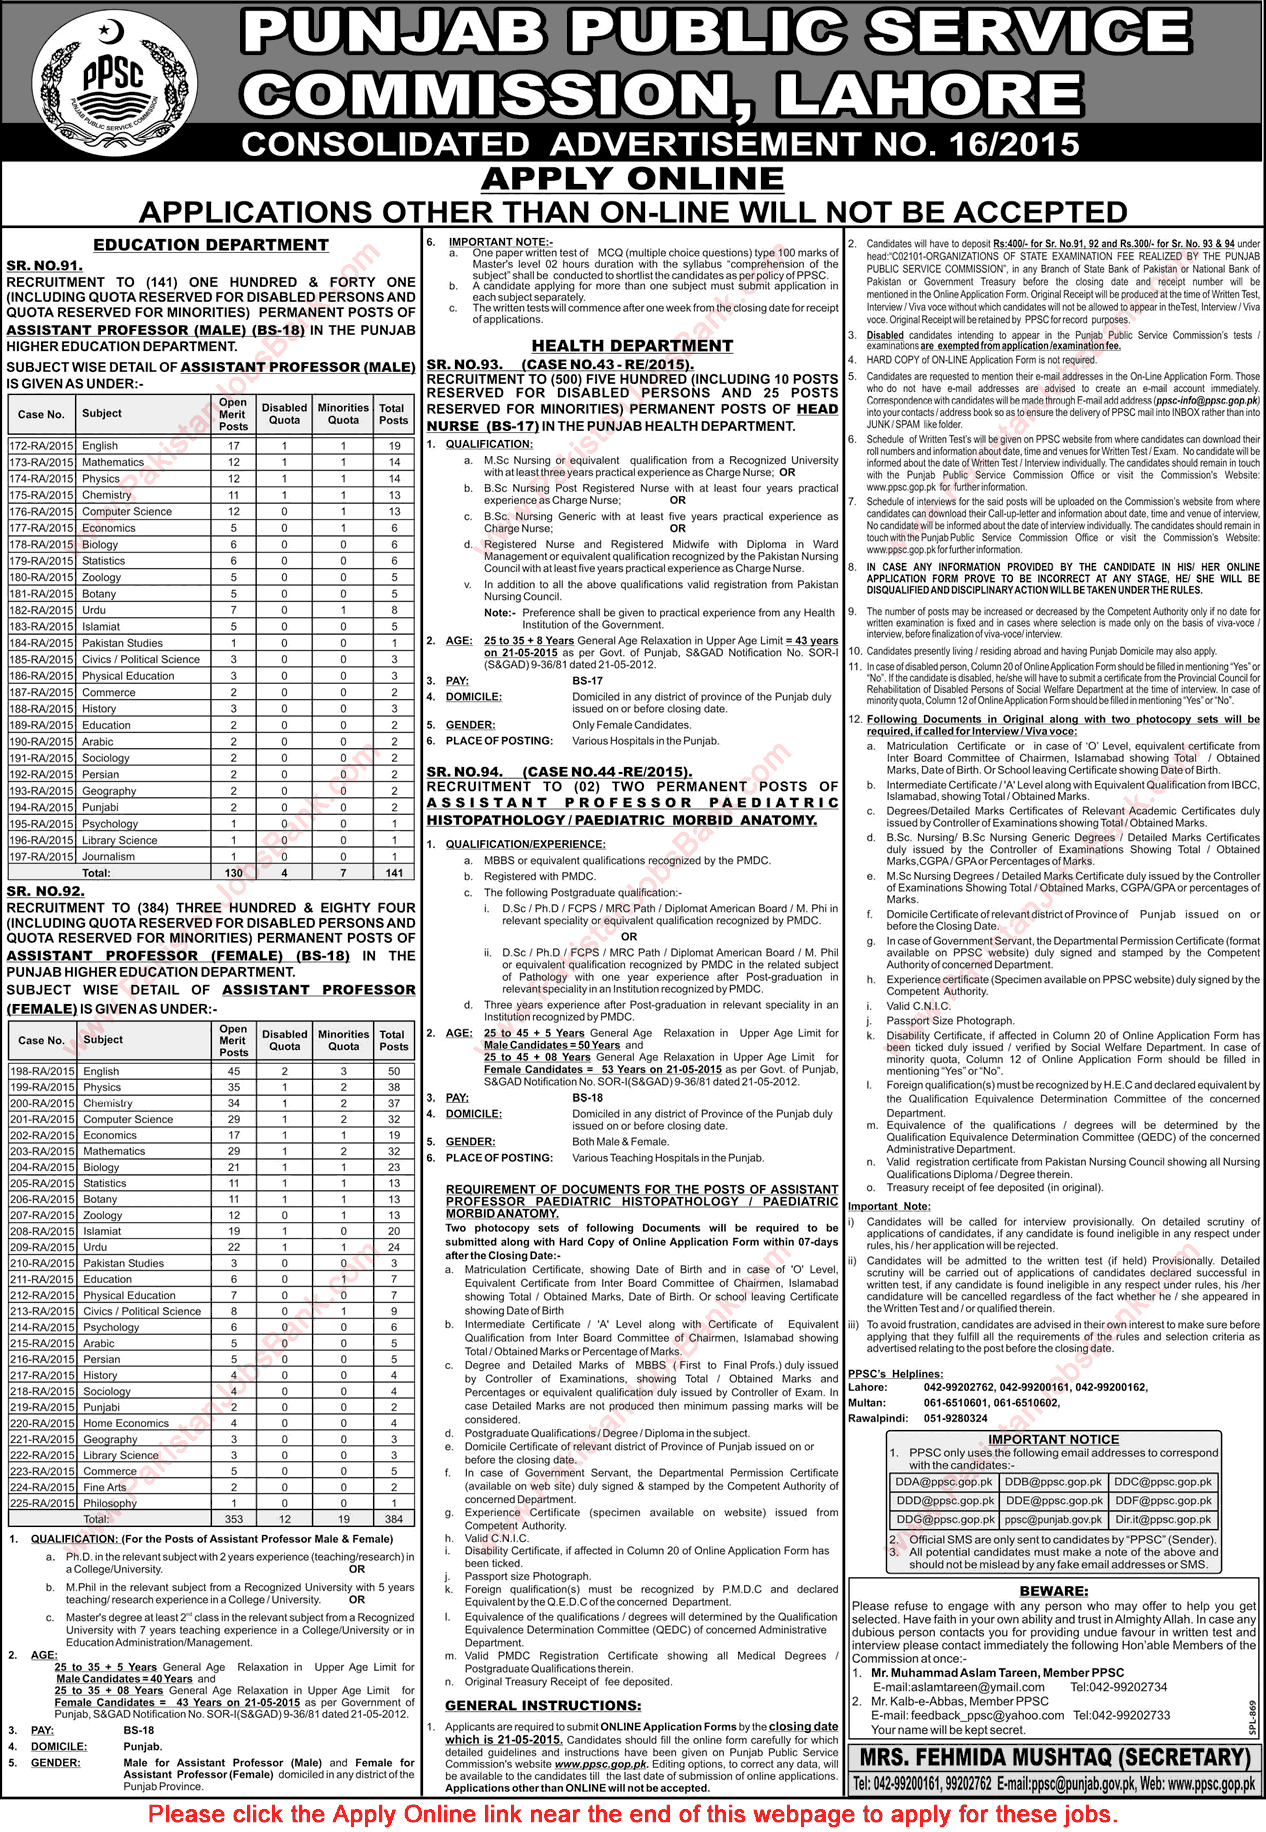 PPSC Jobs May 2015 Assistant Professors in Punjab Higher Education Department Apply Online